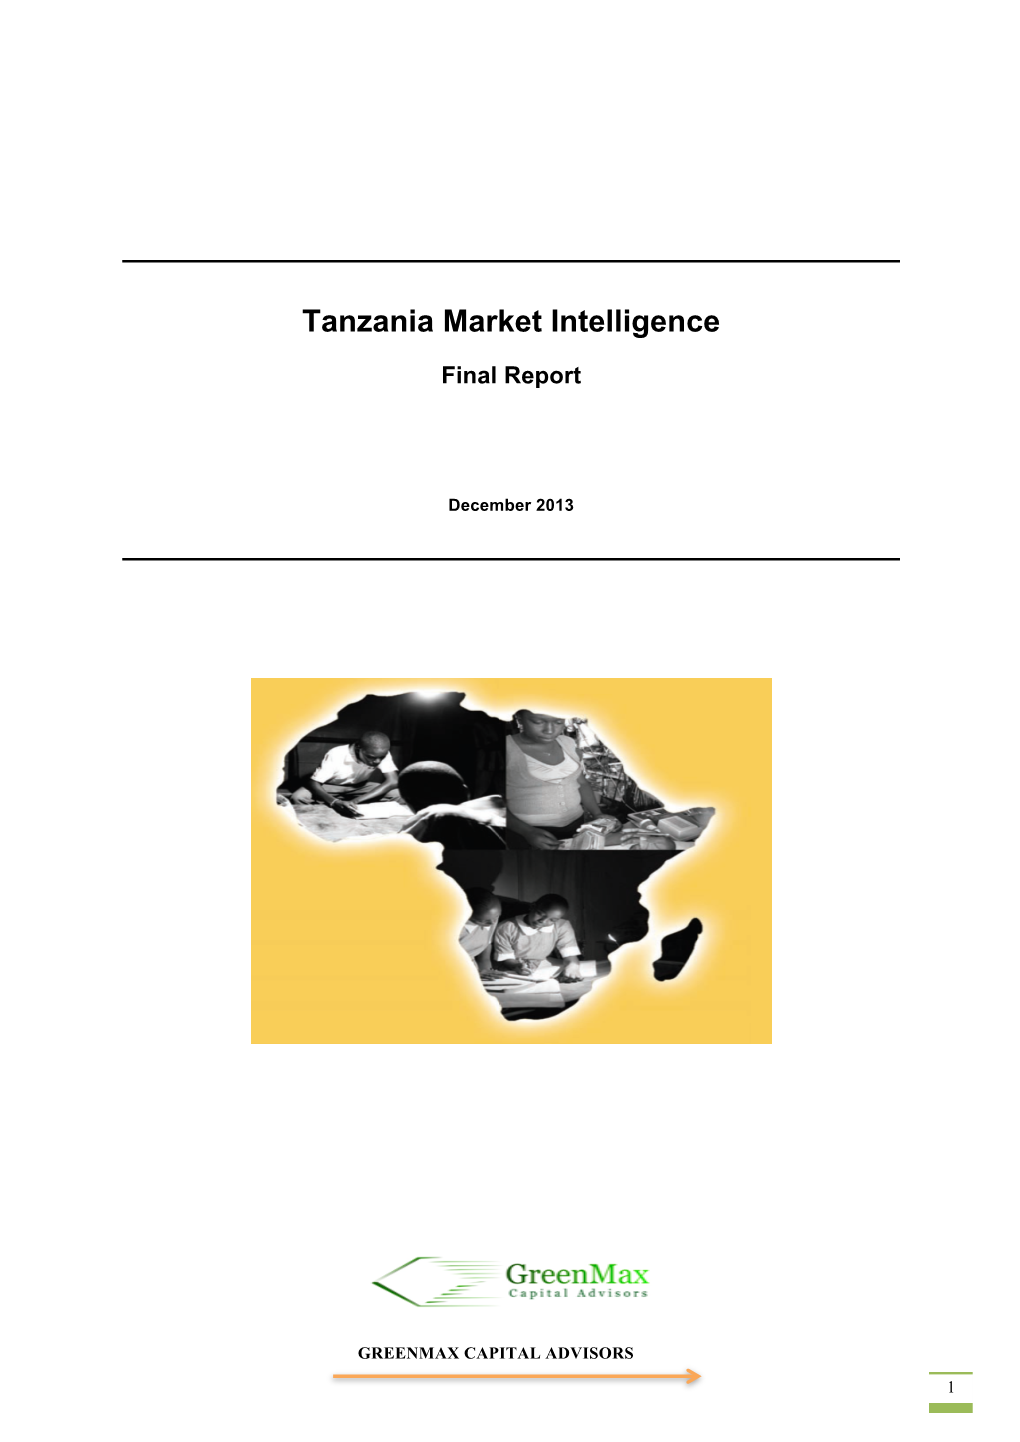 Lighting Africa Tanzania Market Intelligence Report, with Support from the Rural Energy Agency in Tanzania